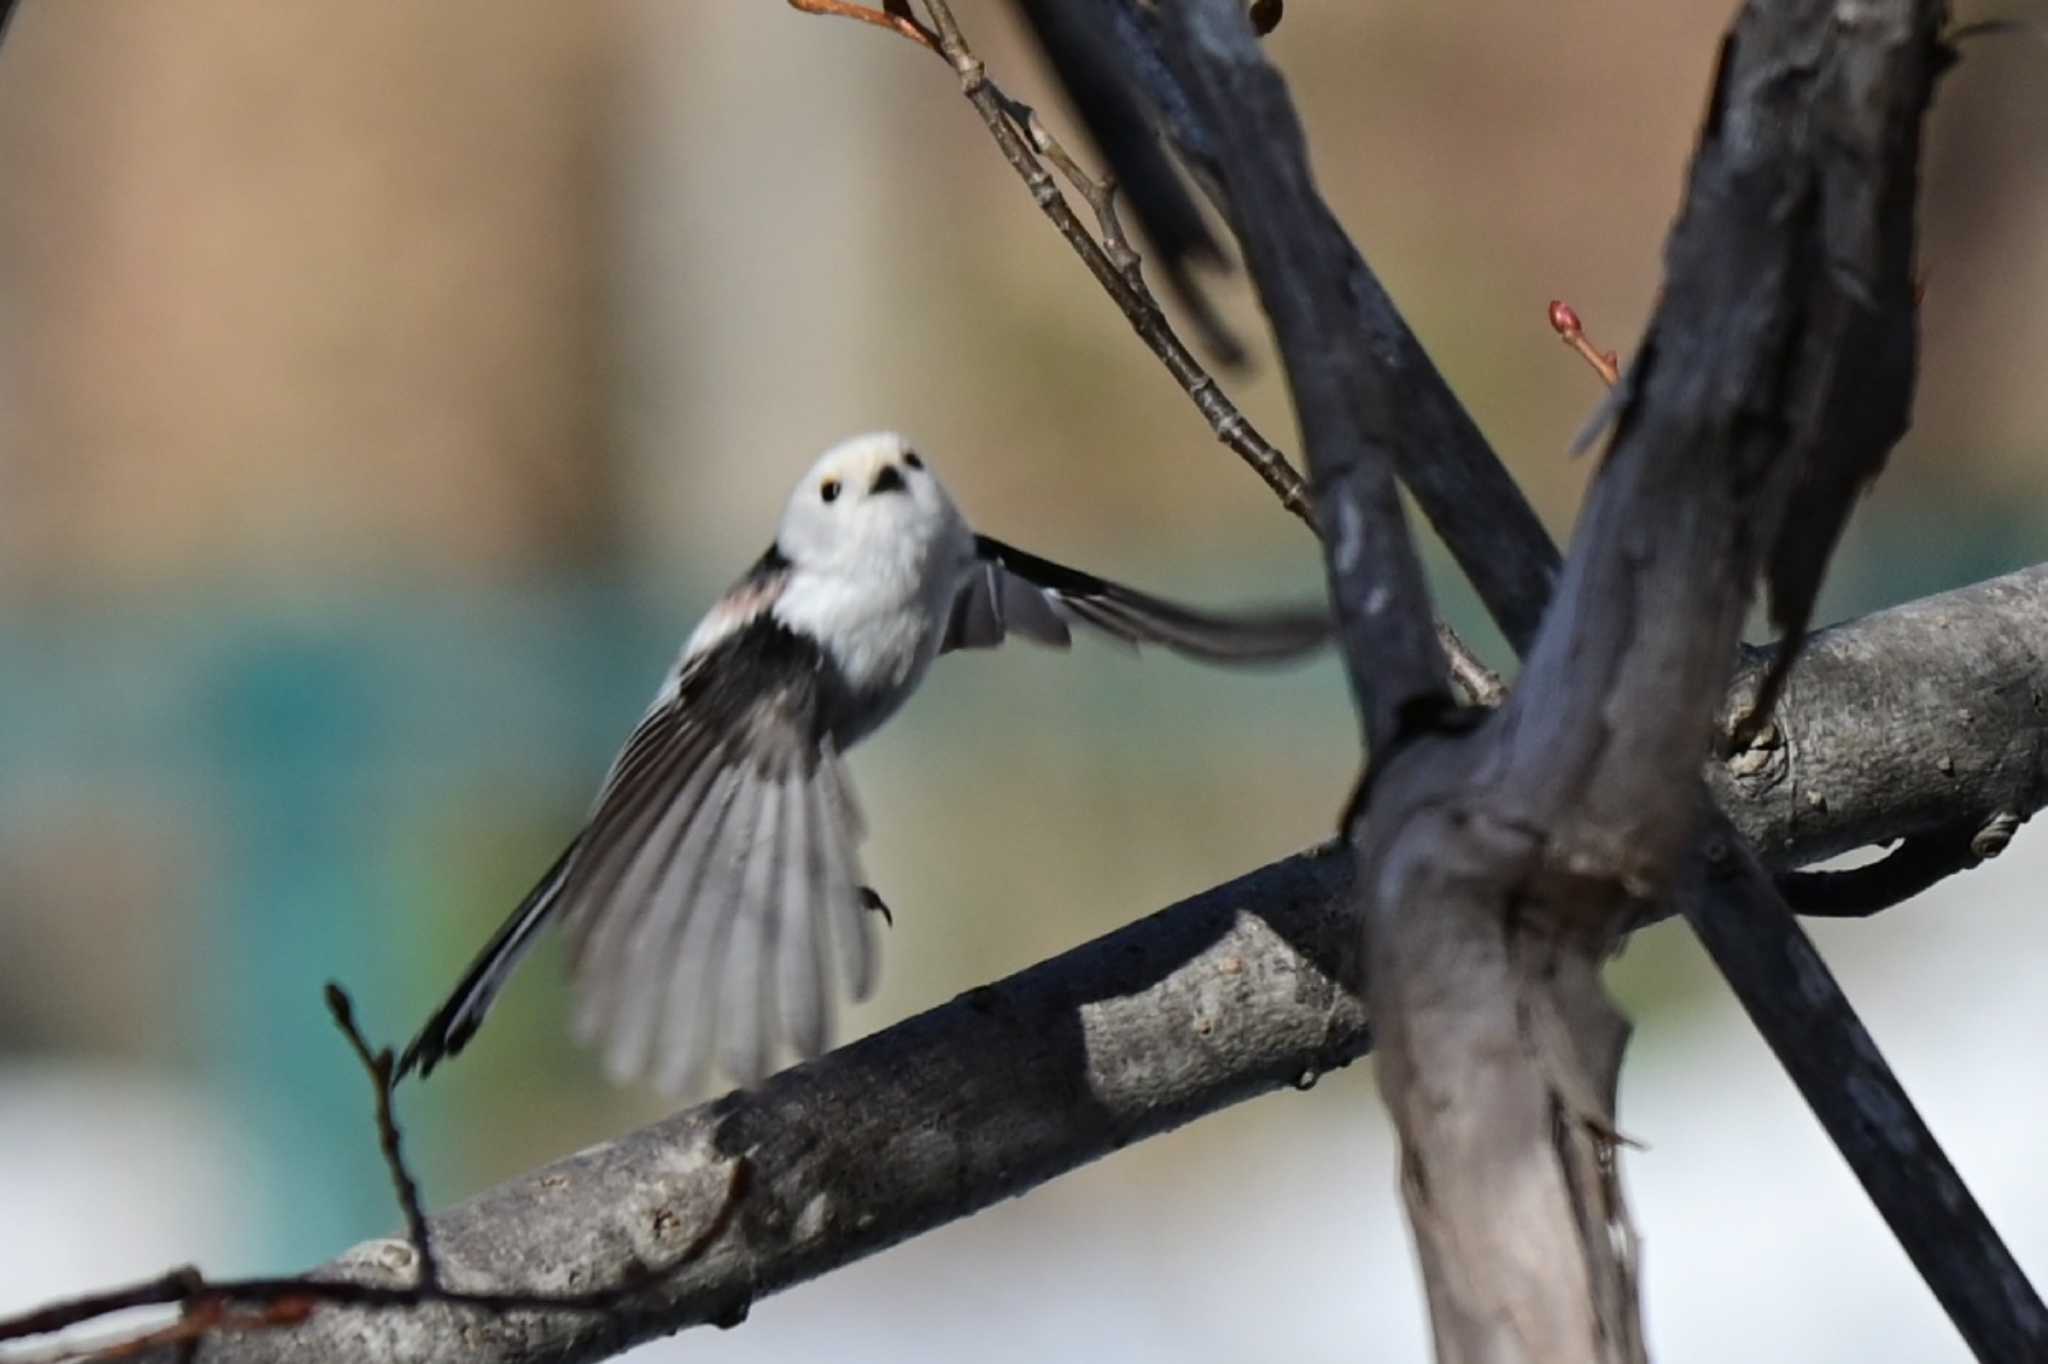 Photo of Long-tailed tit(japonicus) at Nishioka Park by 青カエル🐸